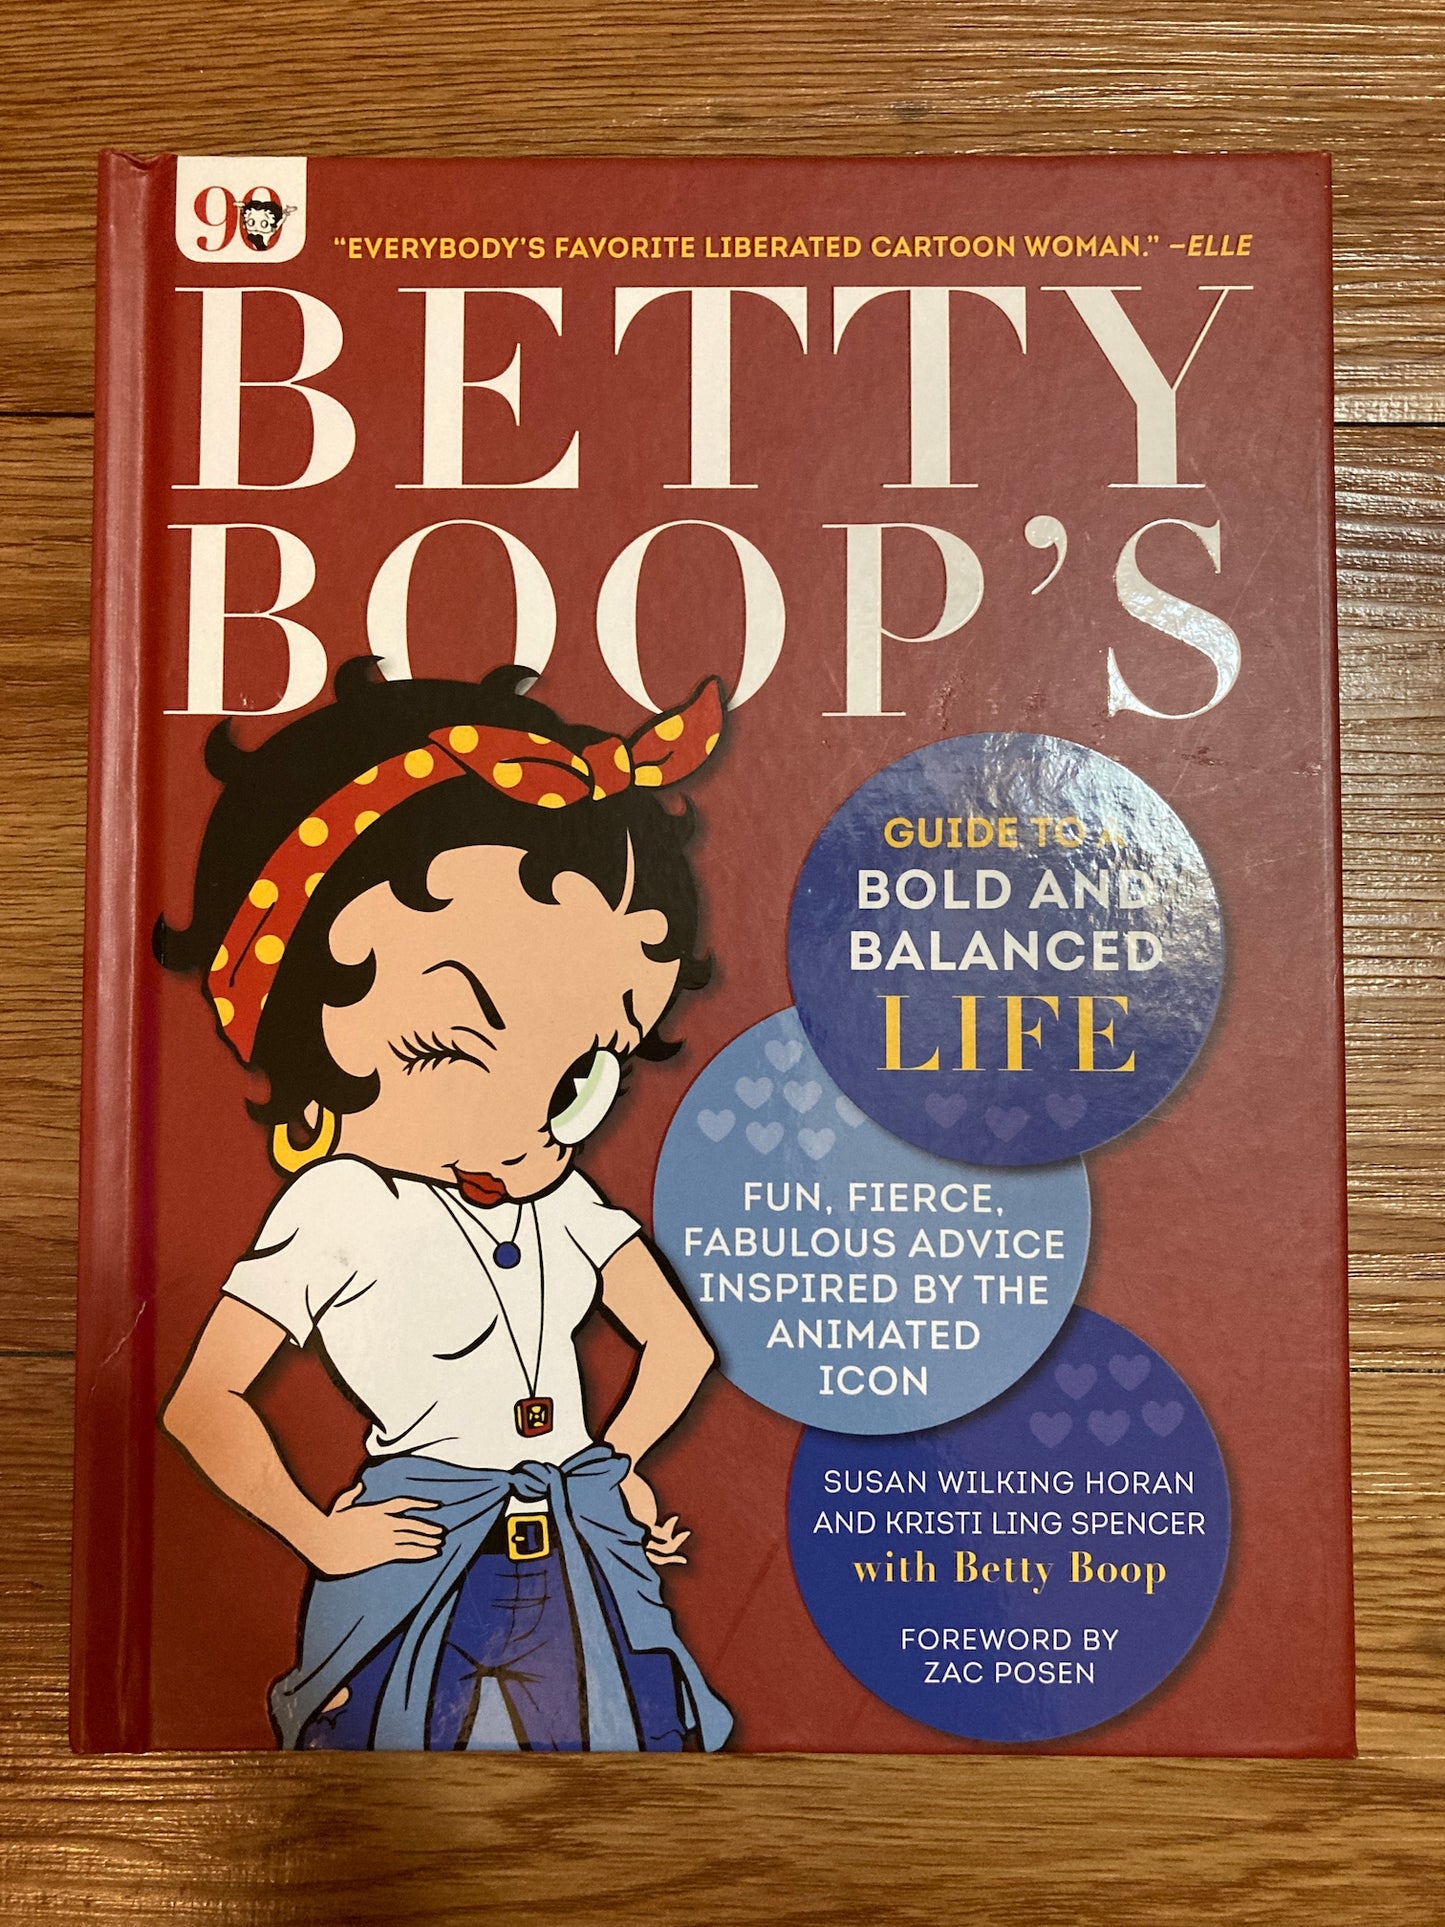 Betty Boop's Guide to a Bold and Balanced Life: Fun, Fierce...